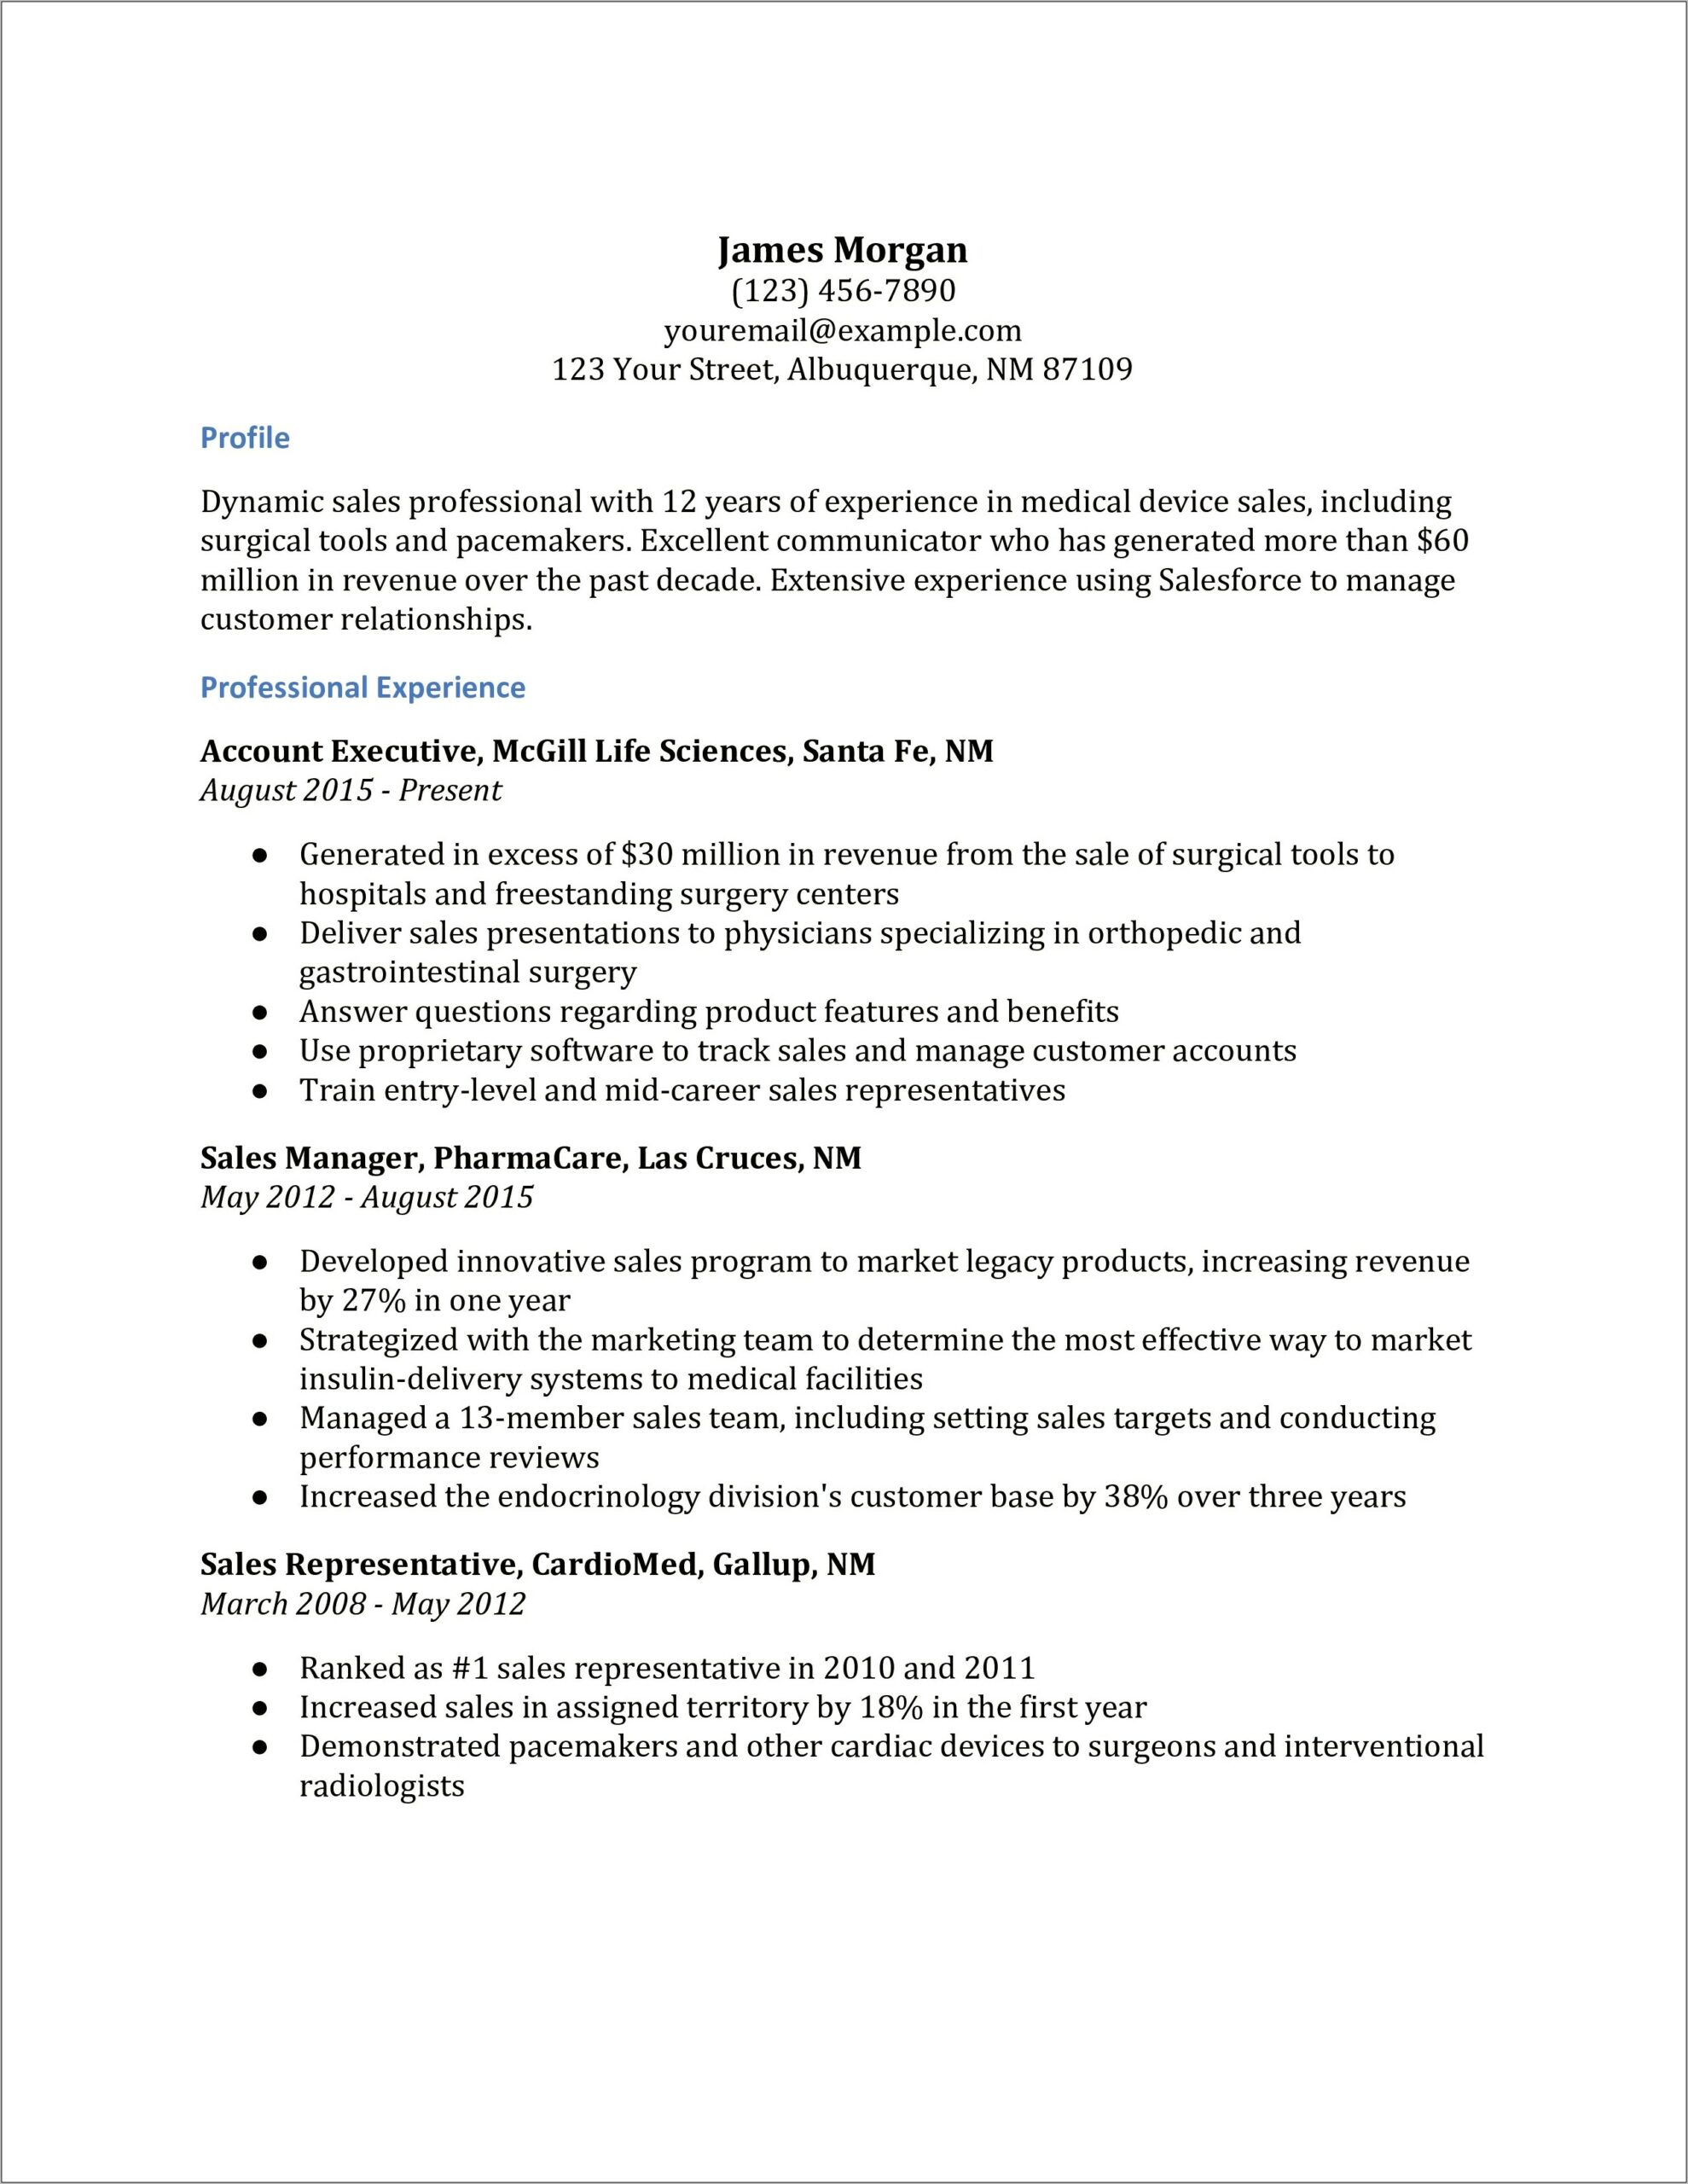 Current Updated Resume Sample For Mid Career Reps